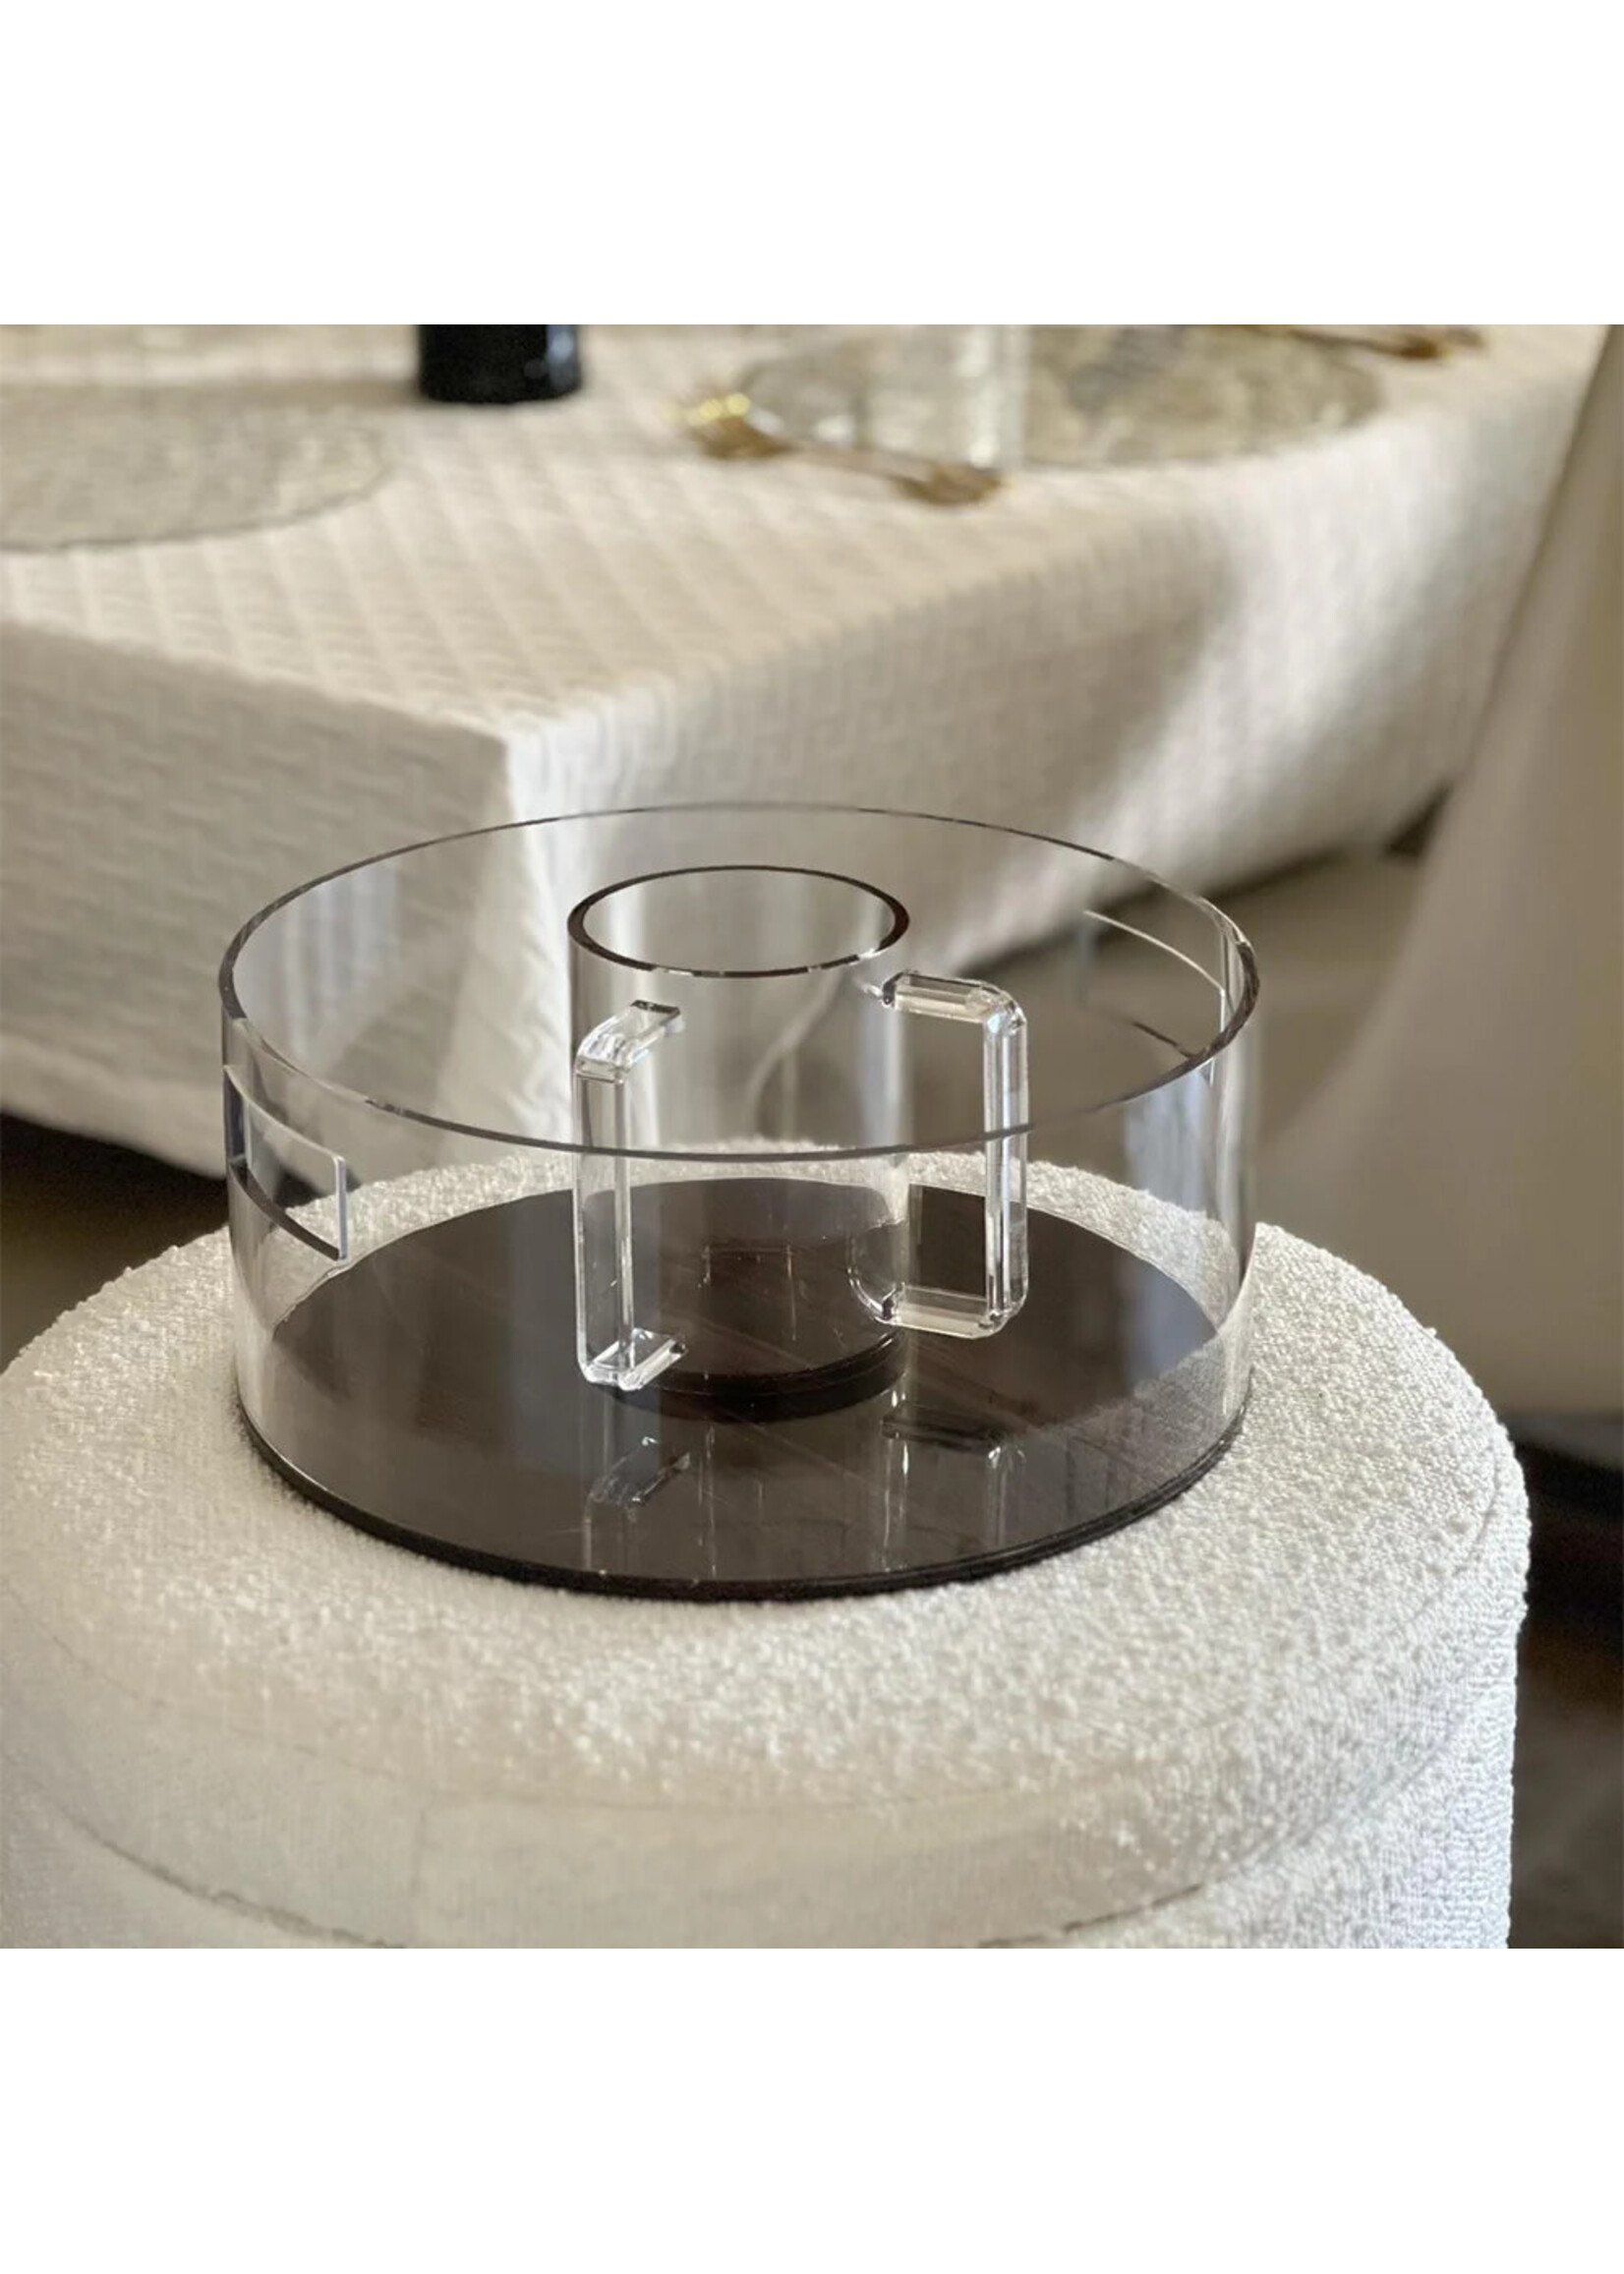 WASHING BOWL LUCITE WOOD ACCENT